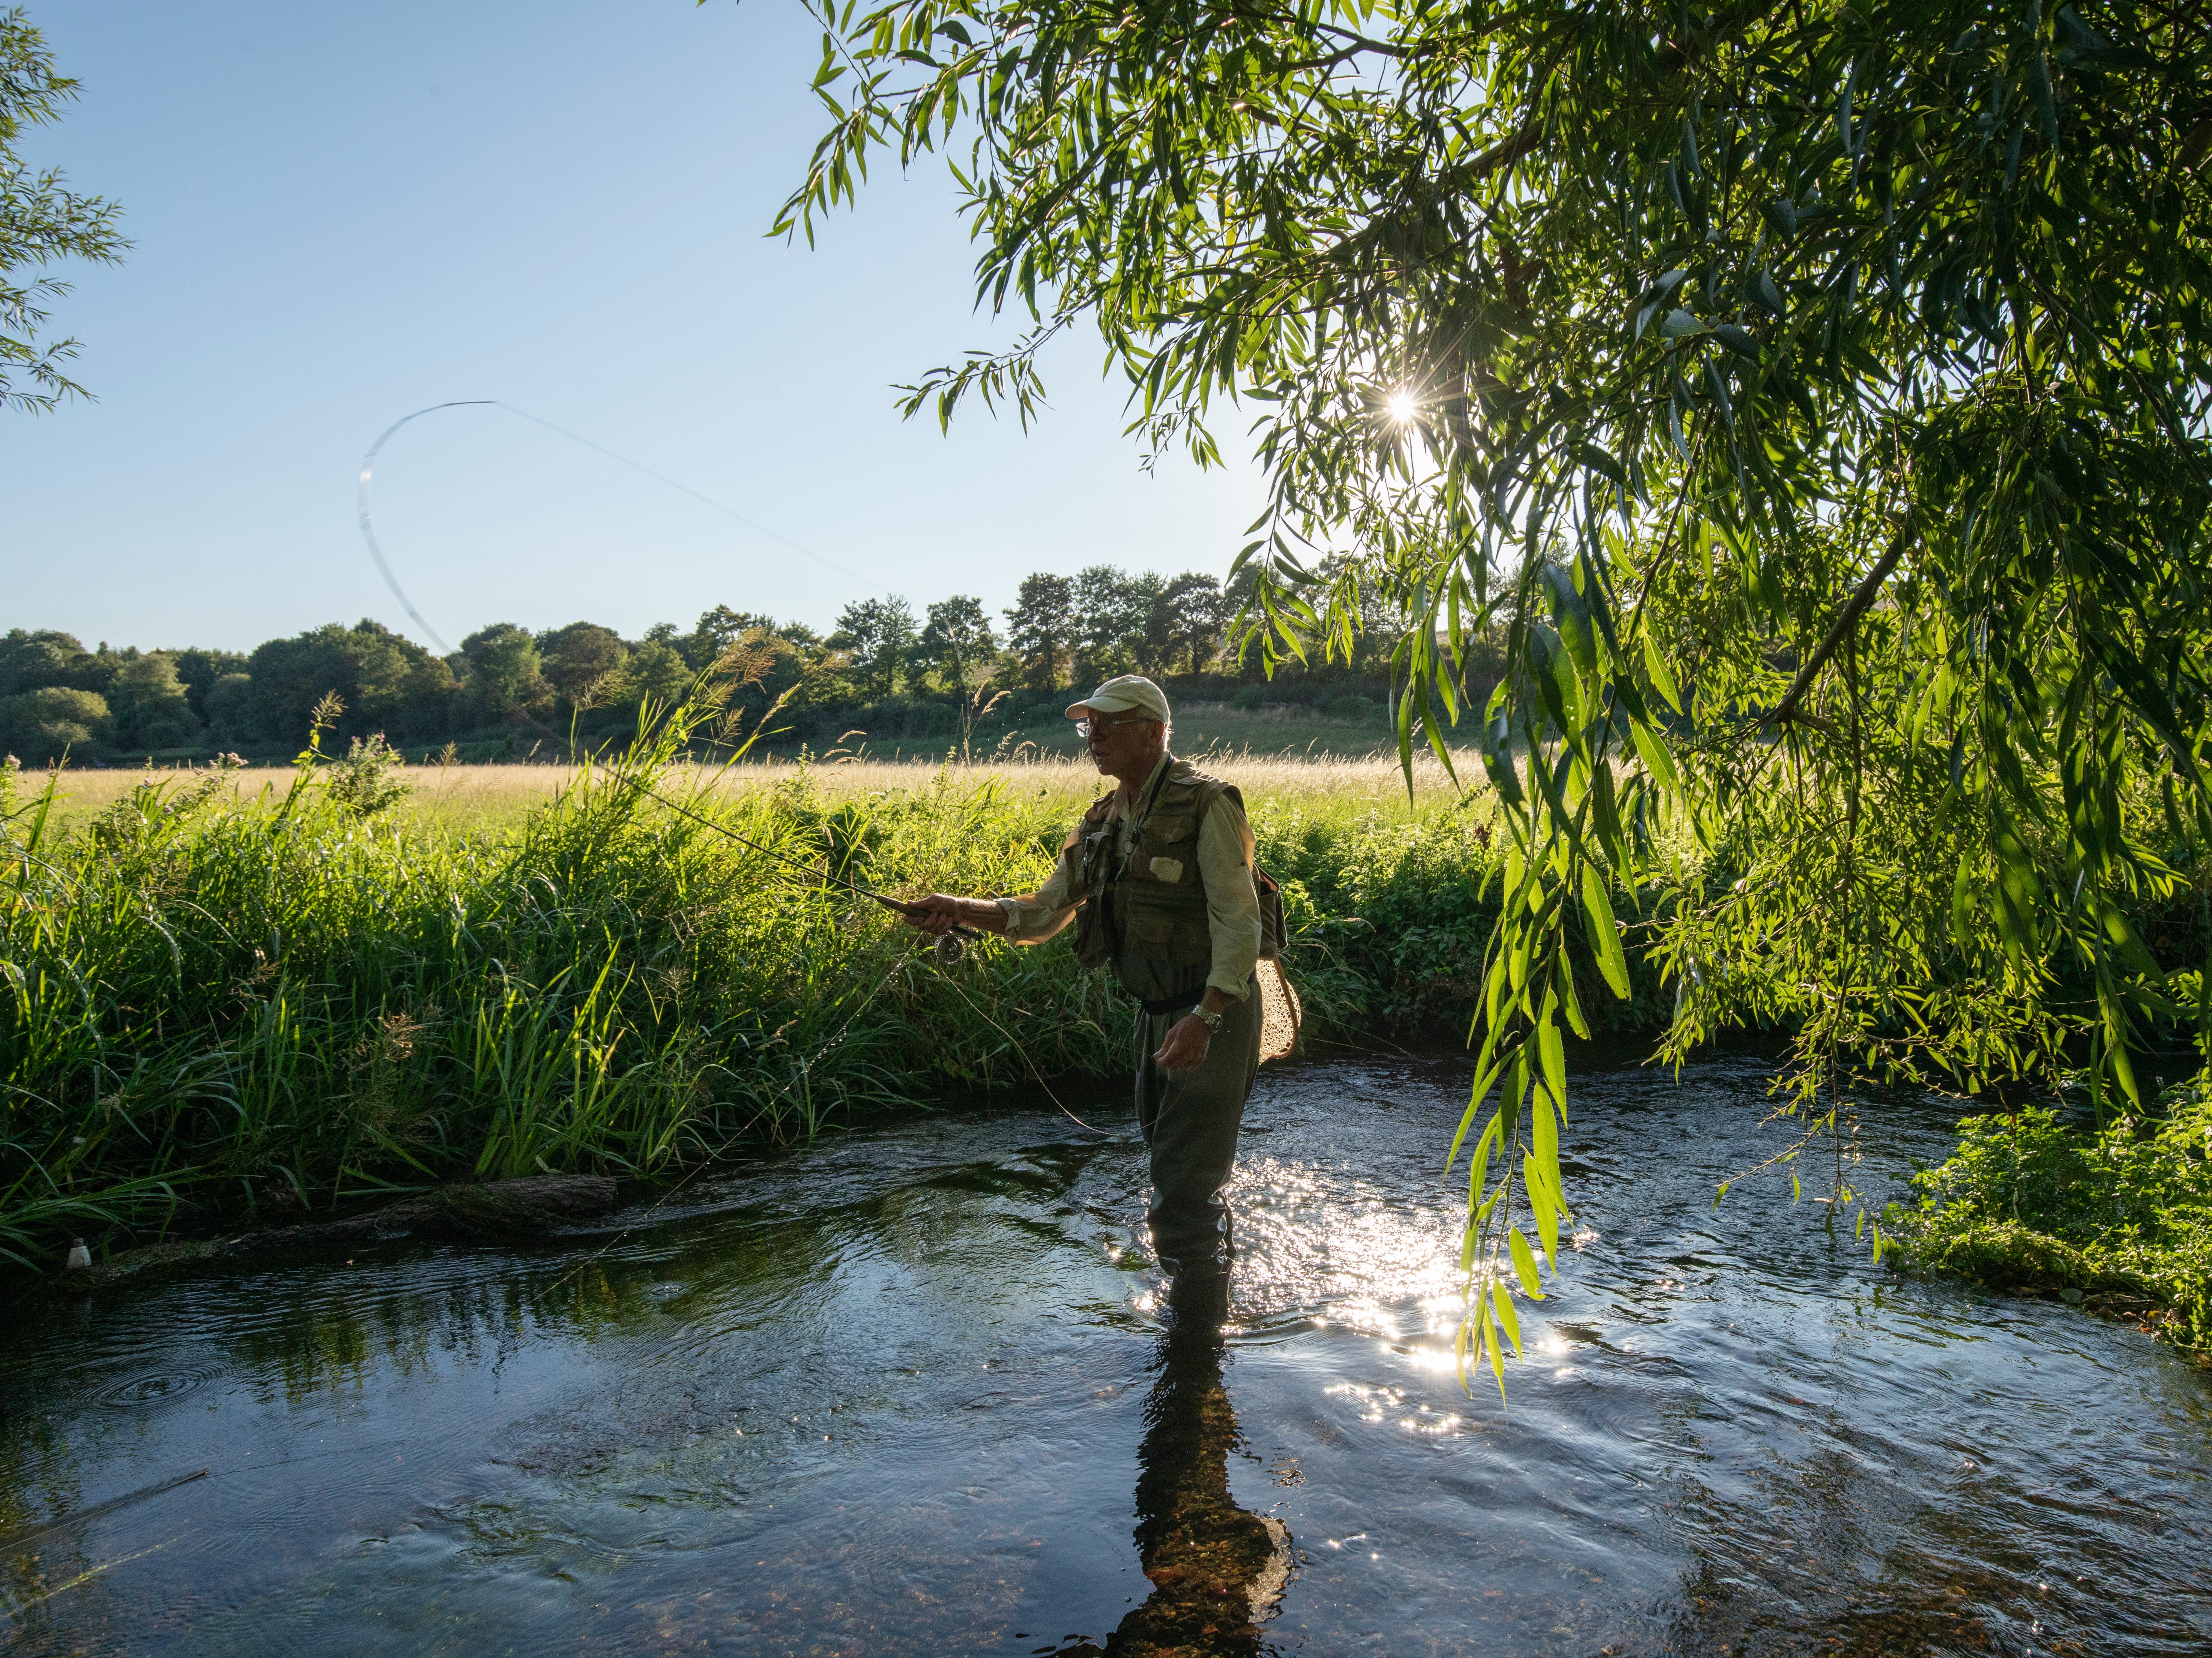 A fly fisherman in the river Darent: Of the world’s 224 chalk streams, 161 are in the UK. These are under threat from increasing water demand